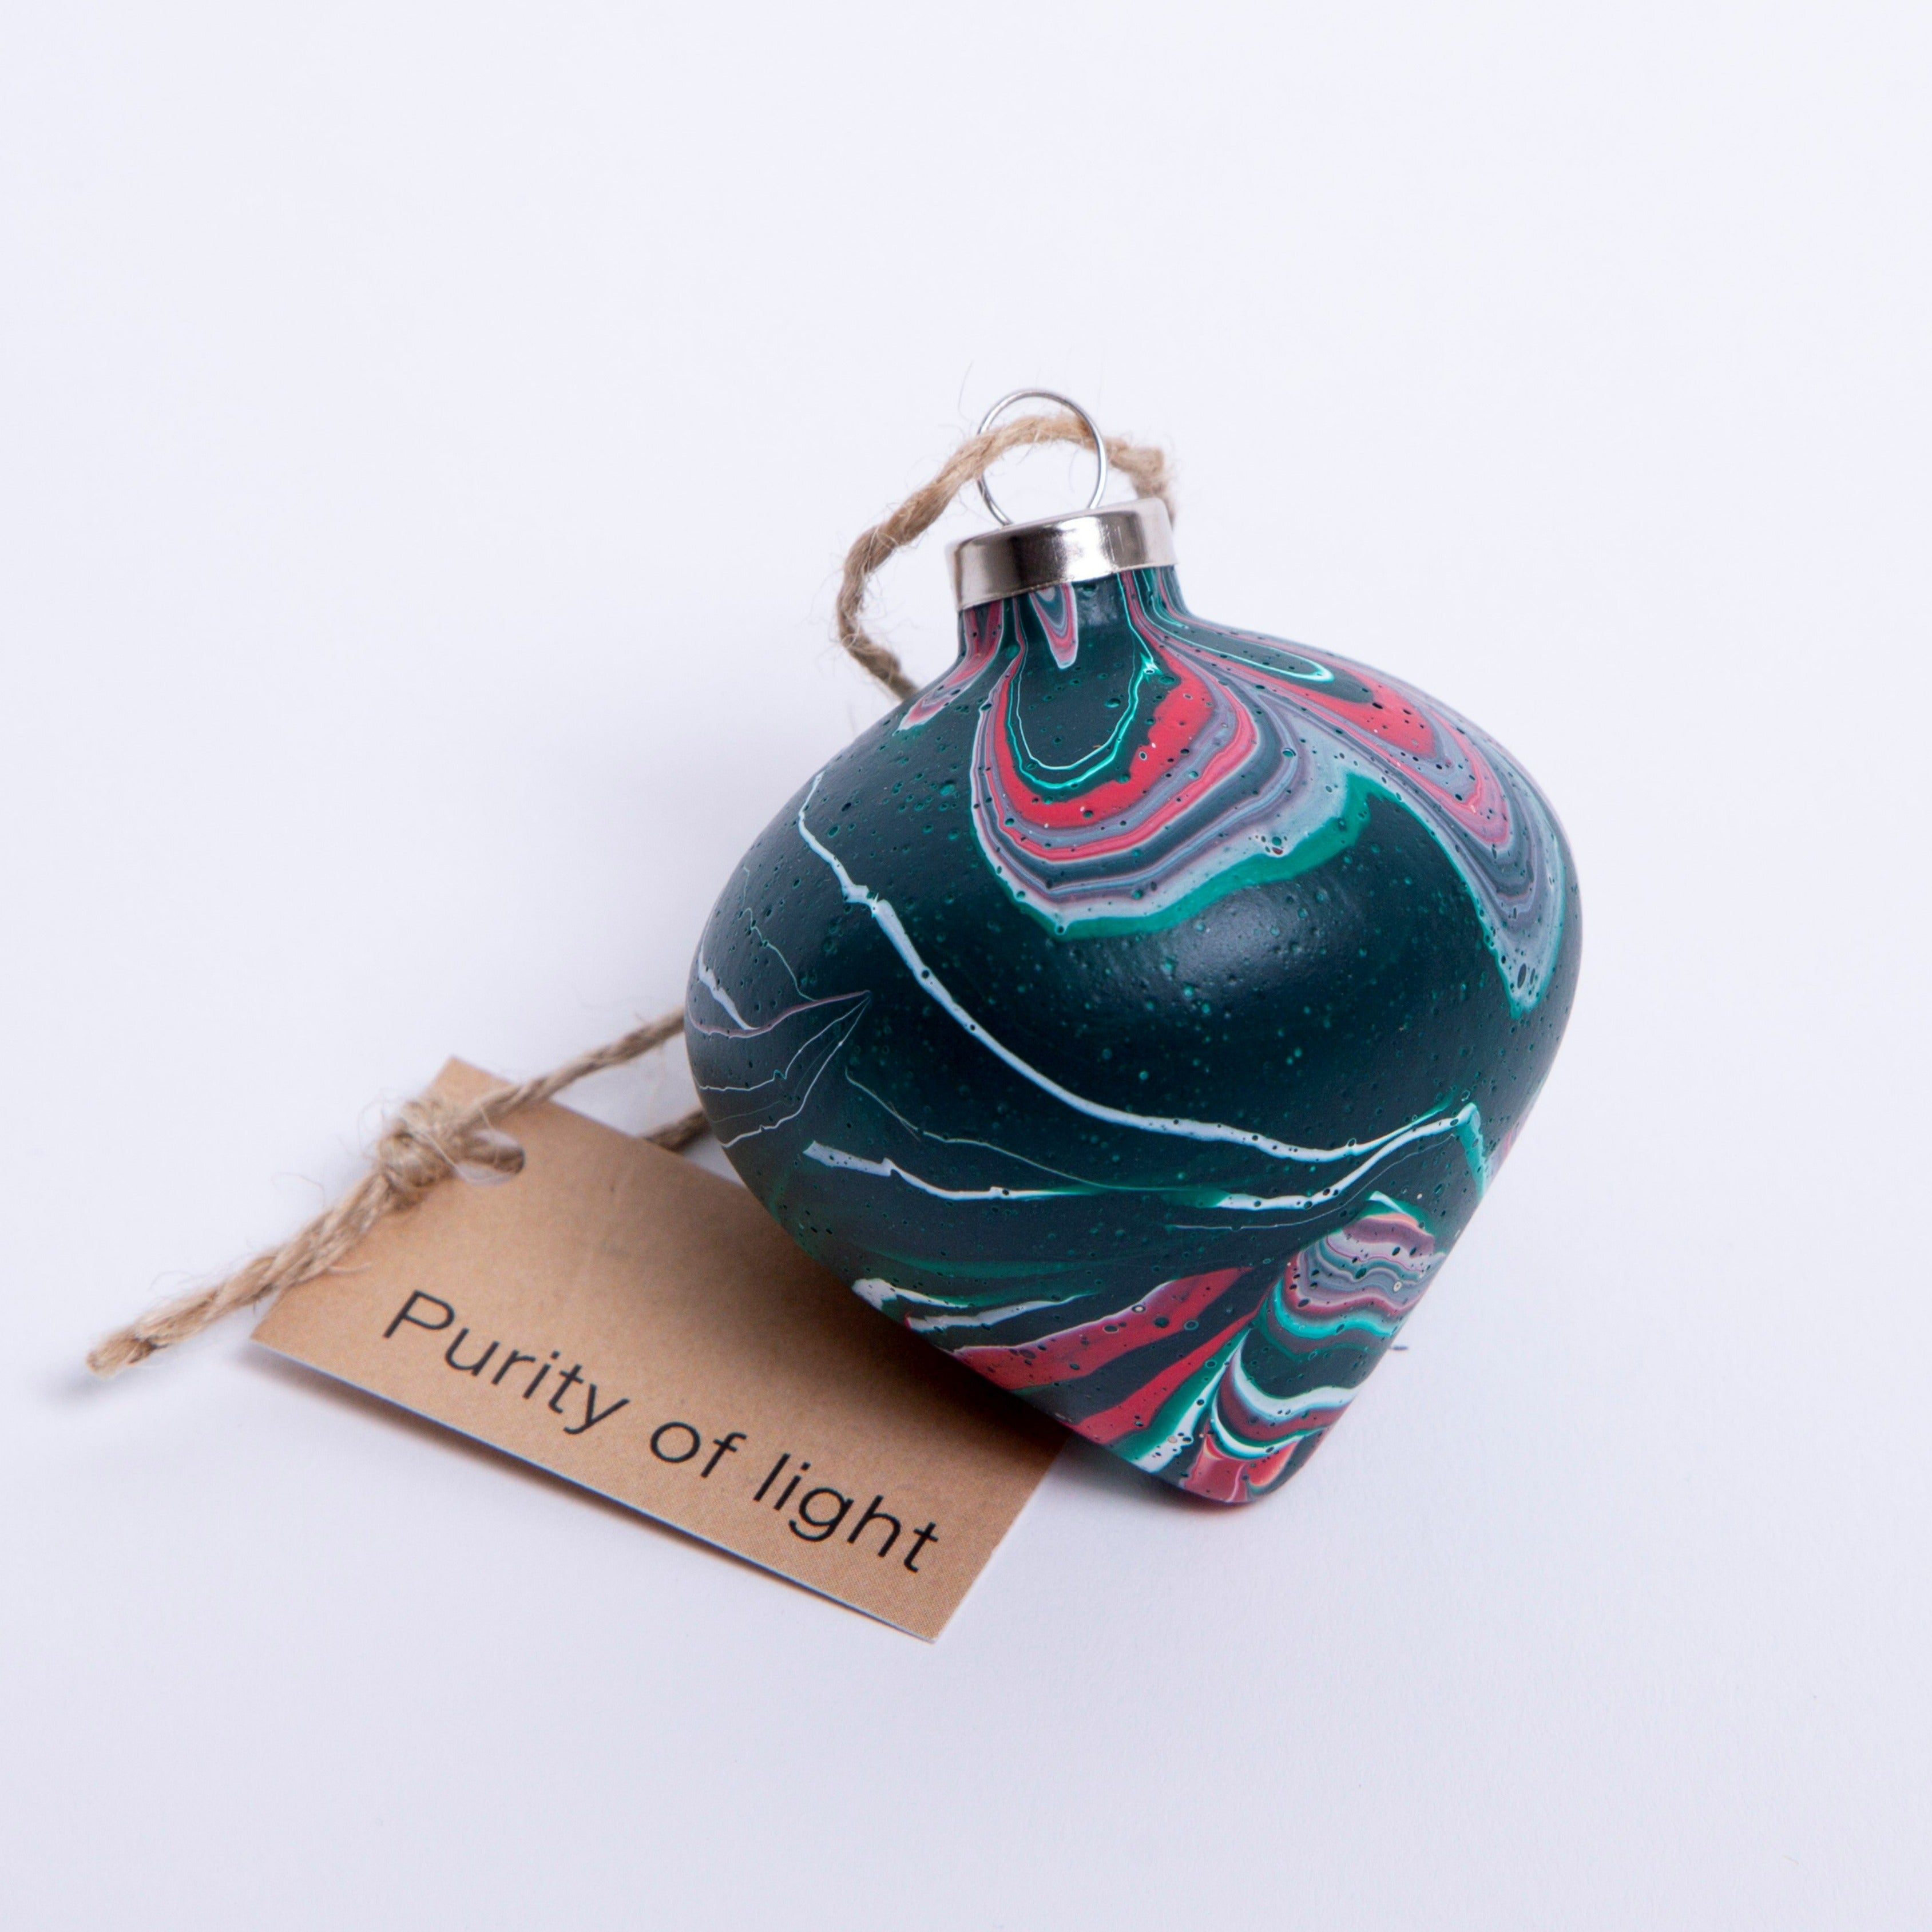 'Purity of Light' Green & Red Hand Painted Ceramic Bauble - Diamond Shape